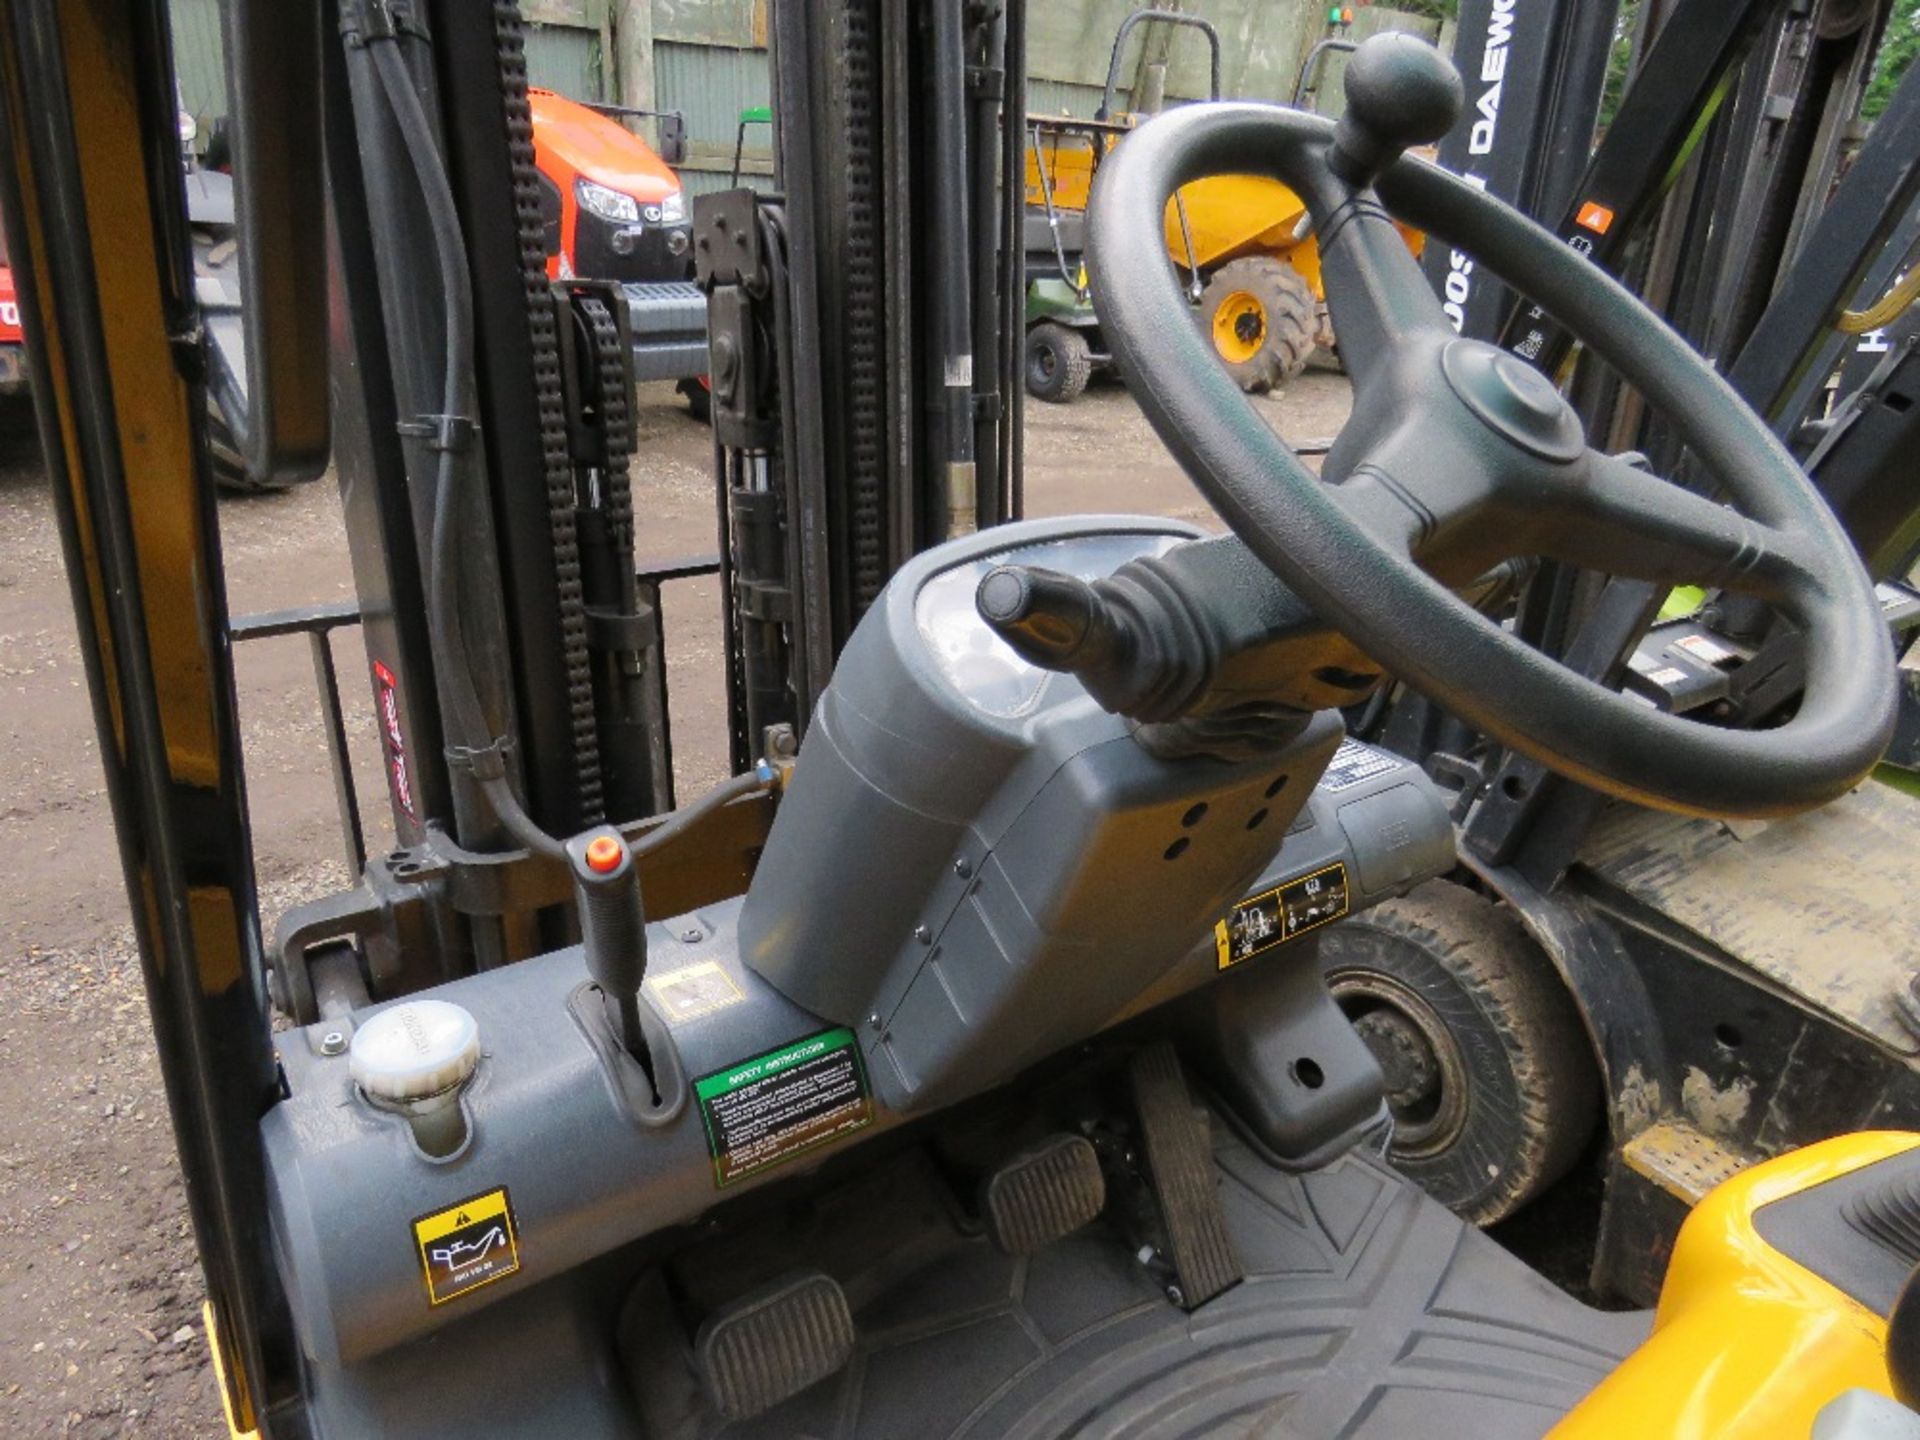 HYUNDAI 20L-7M GAS POWERED FORKLIFT TRUCK, YEAR 2018. 1600 REC HOURS APPROX. EXTRA SERVICE. - Image 6 of 11